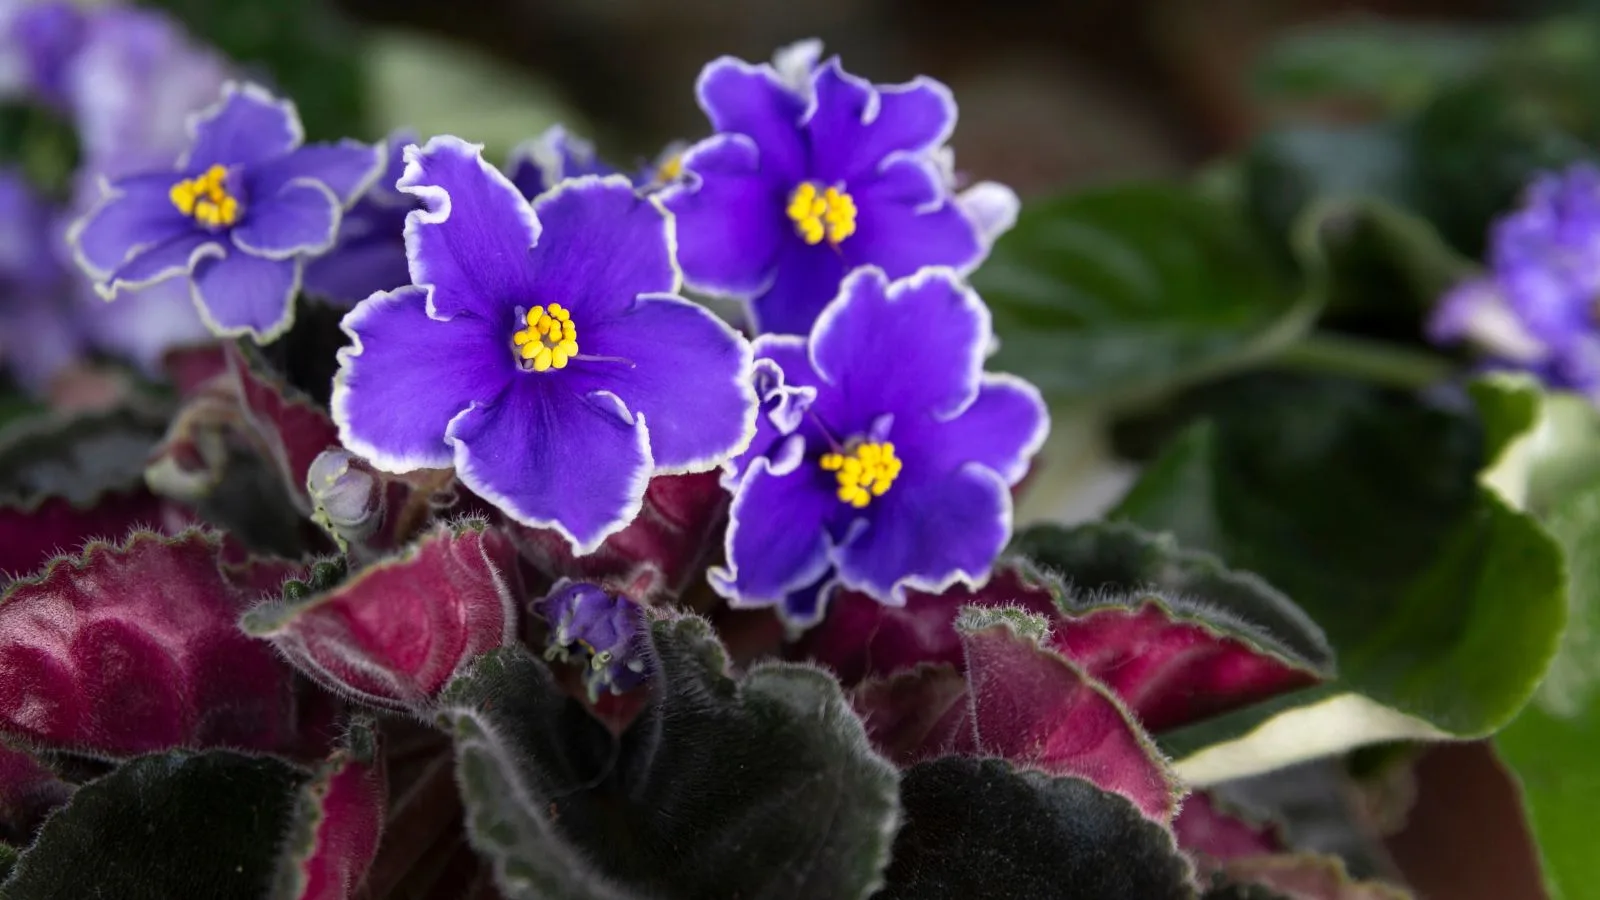 Striking purple African violets with a white edge. 